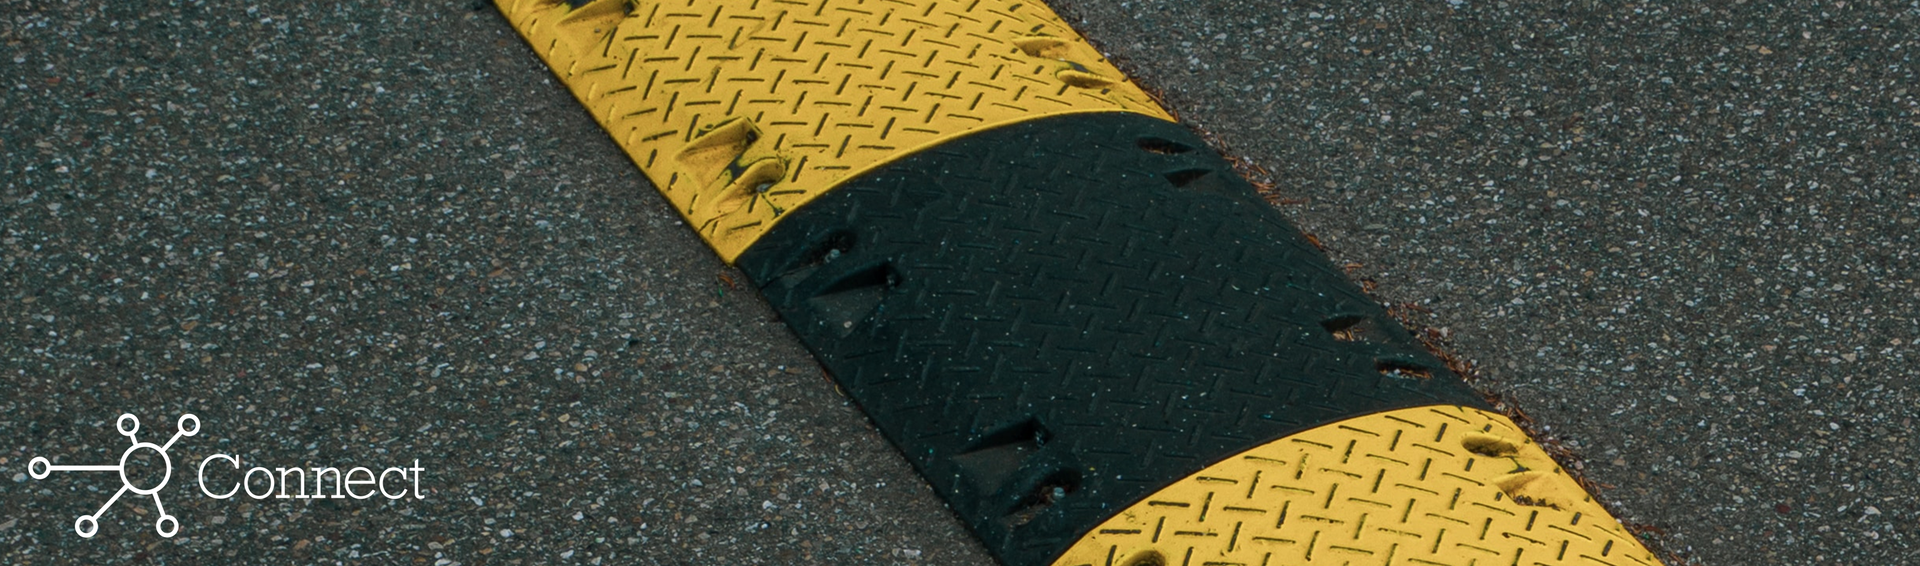 A yellow and black striped speed bump on asphalt